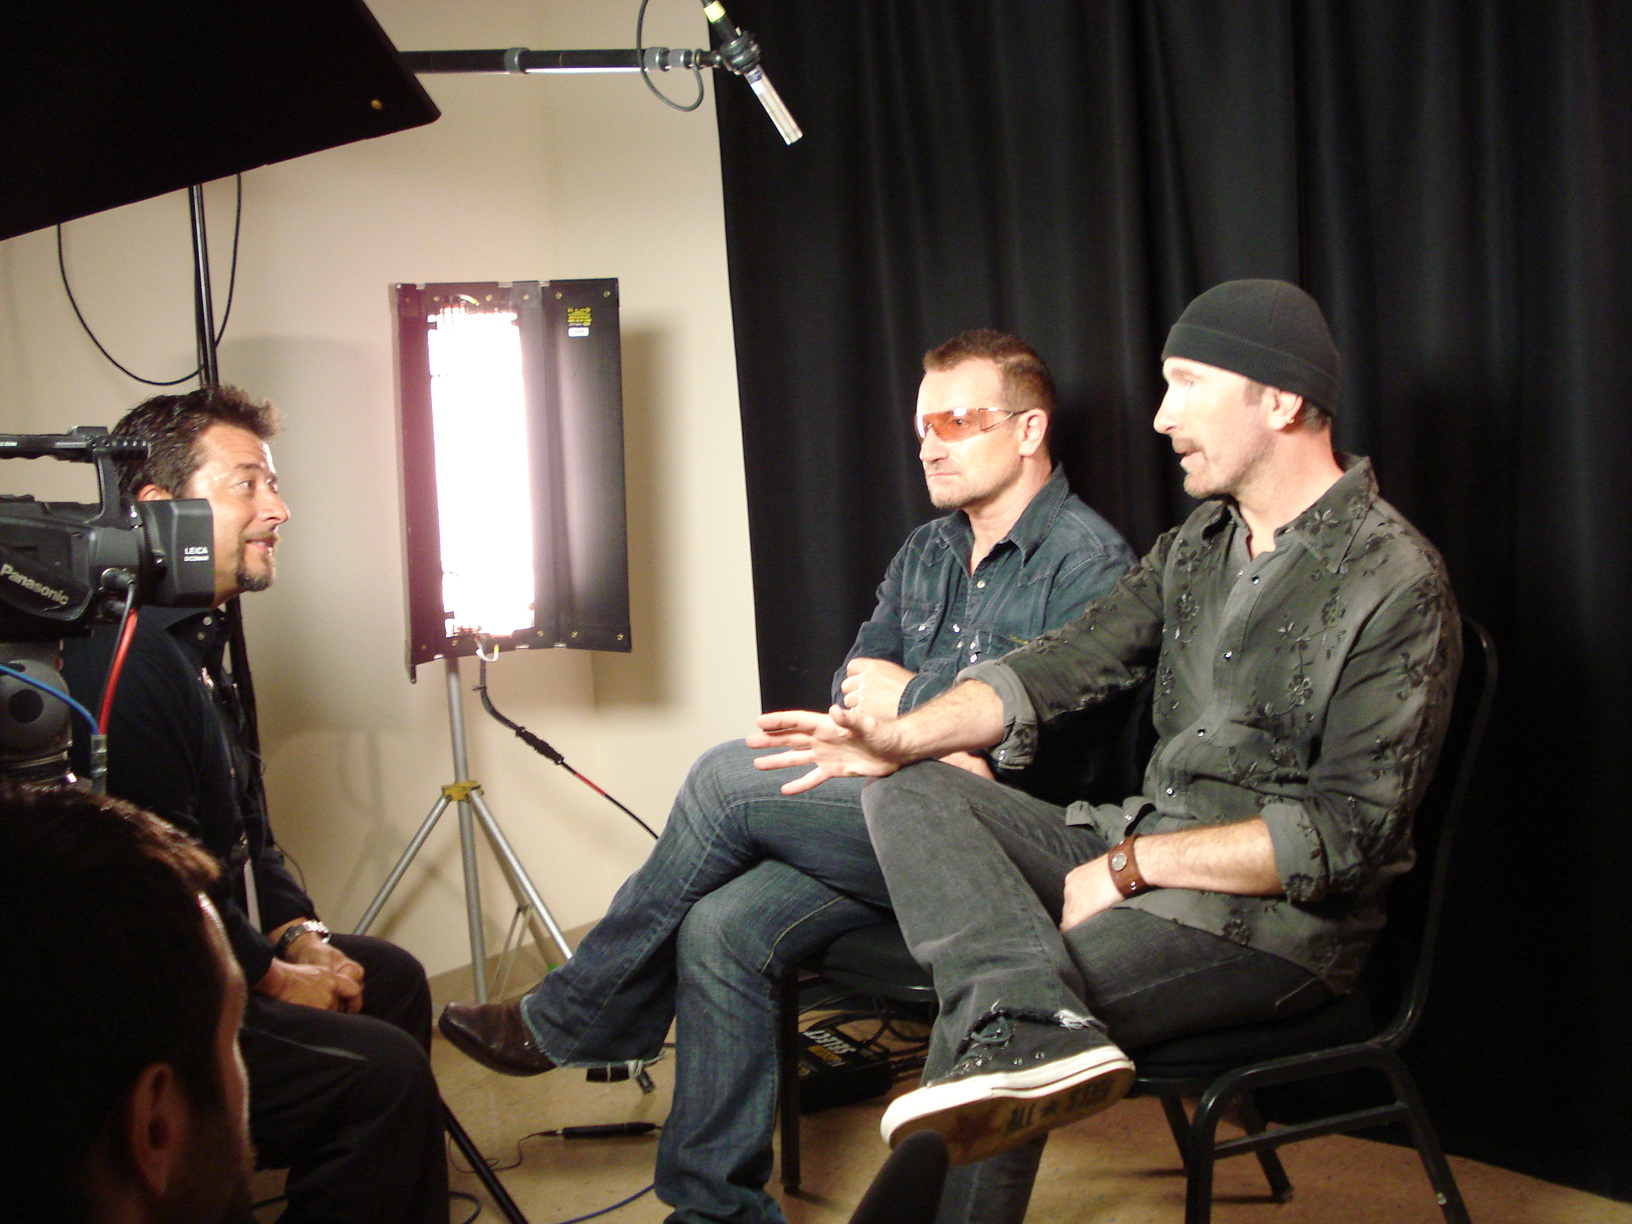 Directing a film project with Bono & the Edge 2012